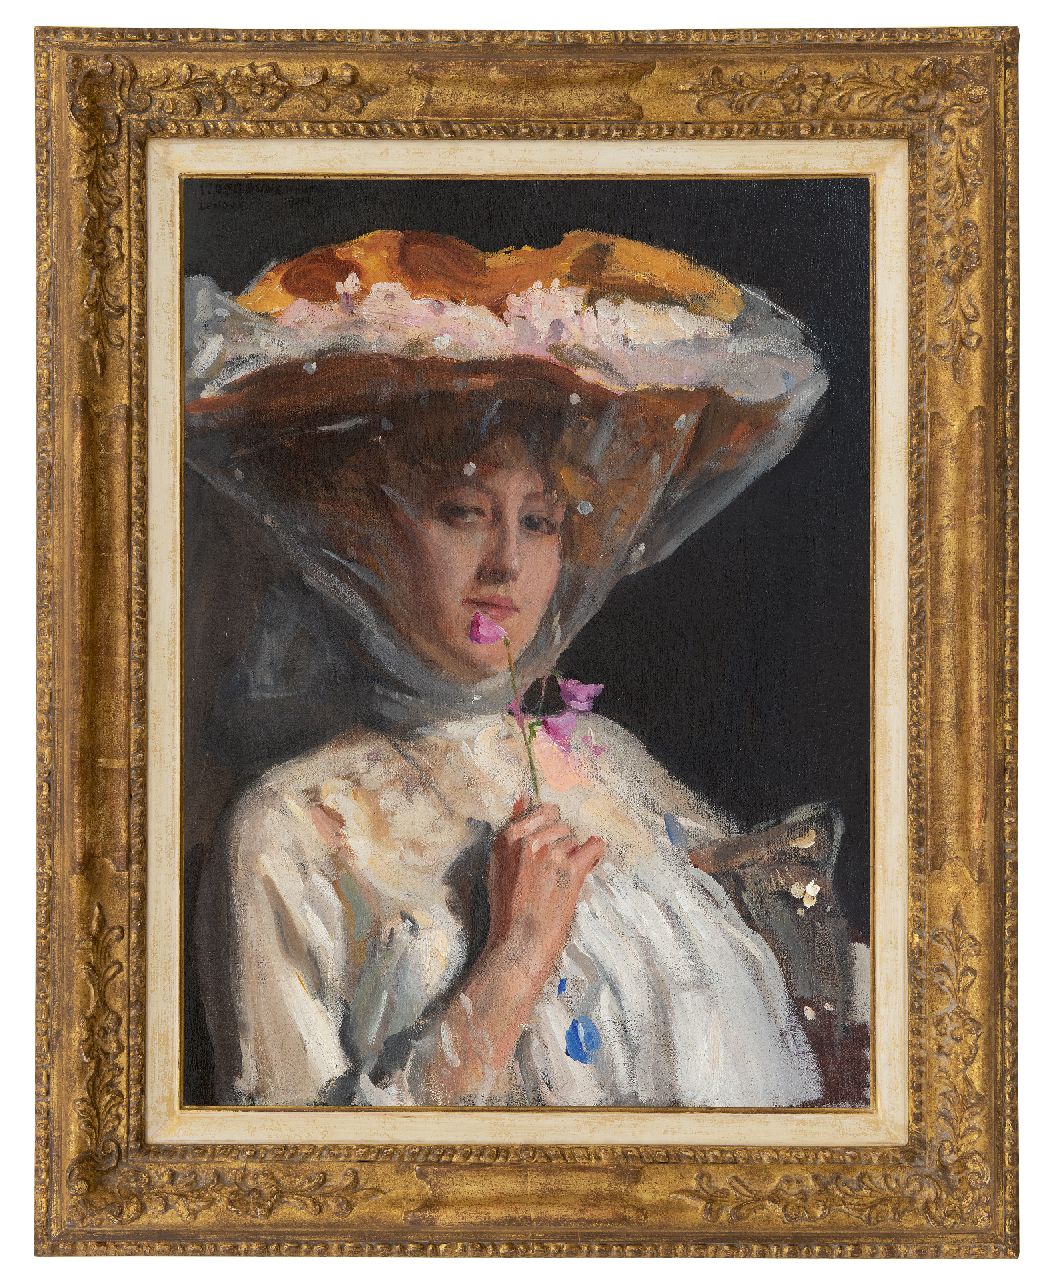 Oppenheimer J.  | Joseph Oppenheimer | Paintings offered for sale | Portrait of a lady smelling sweetpeas, oil on canvas 68.8 x 51.3 cm, signed u.l. and dated 'London' 1904